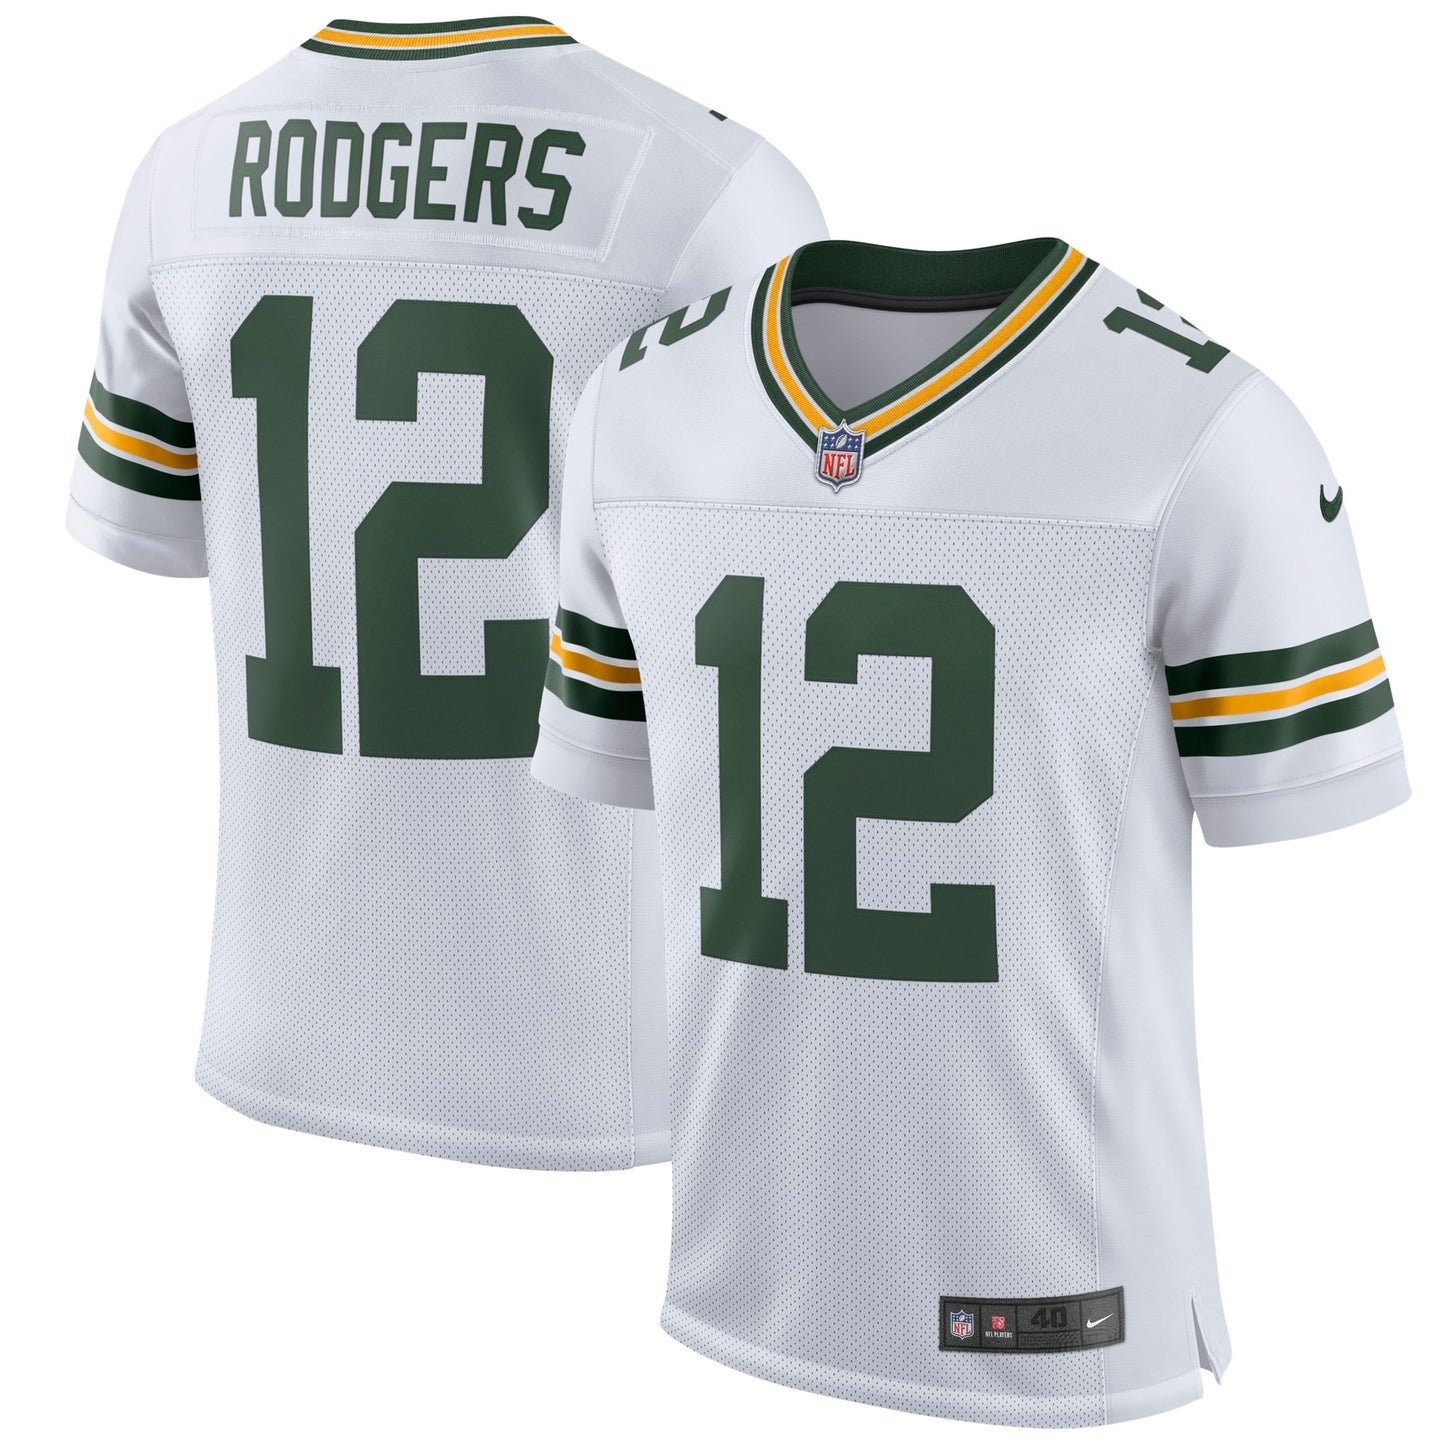 Aaron Rodgers Green Bay Packers Nike Classic Elite Player Jersey - White